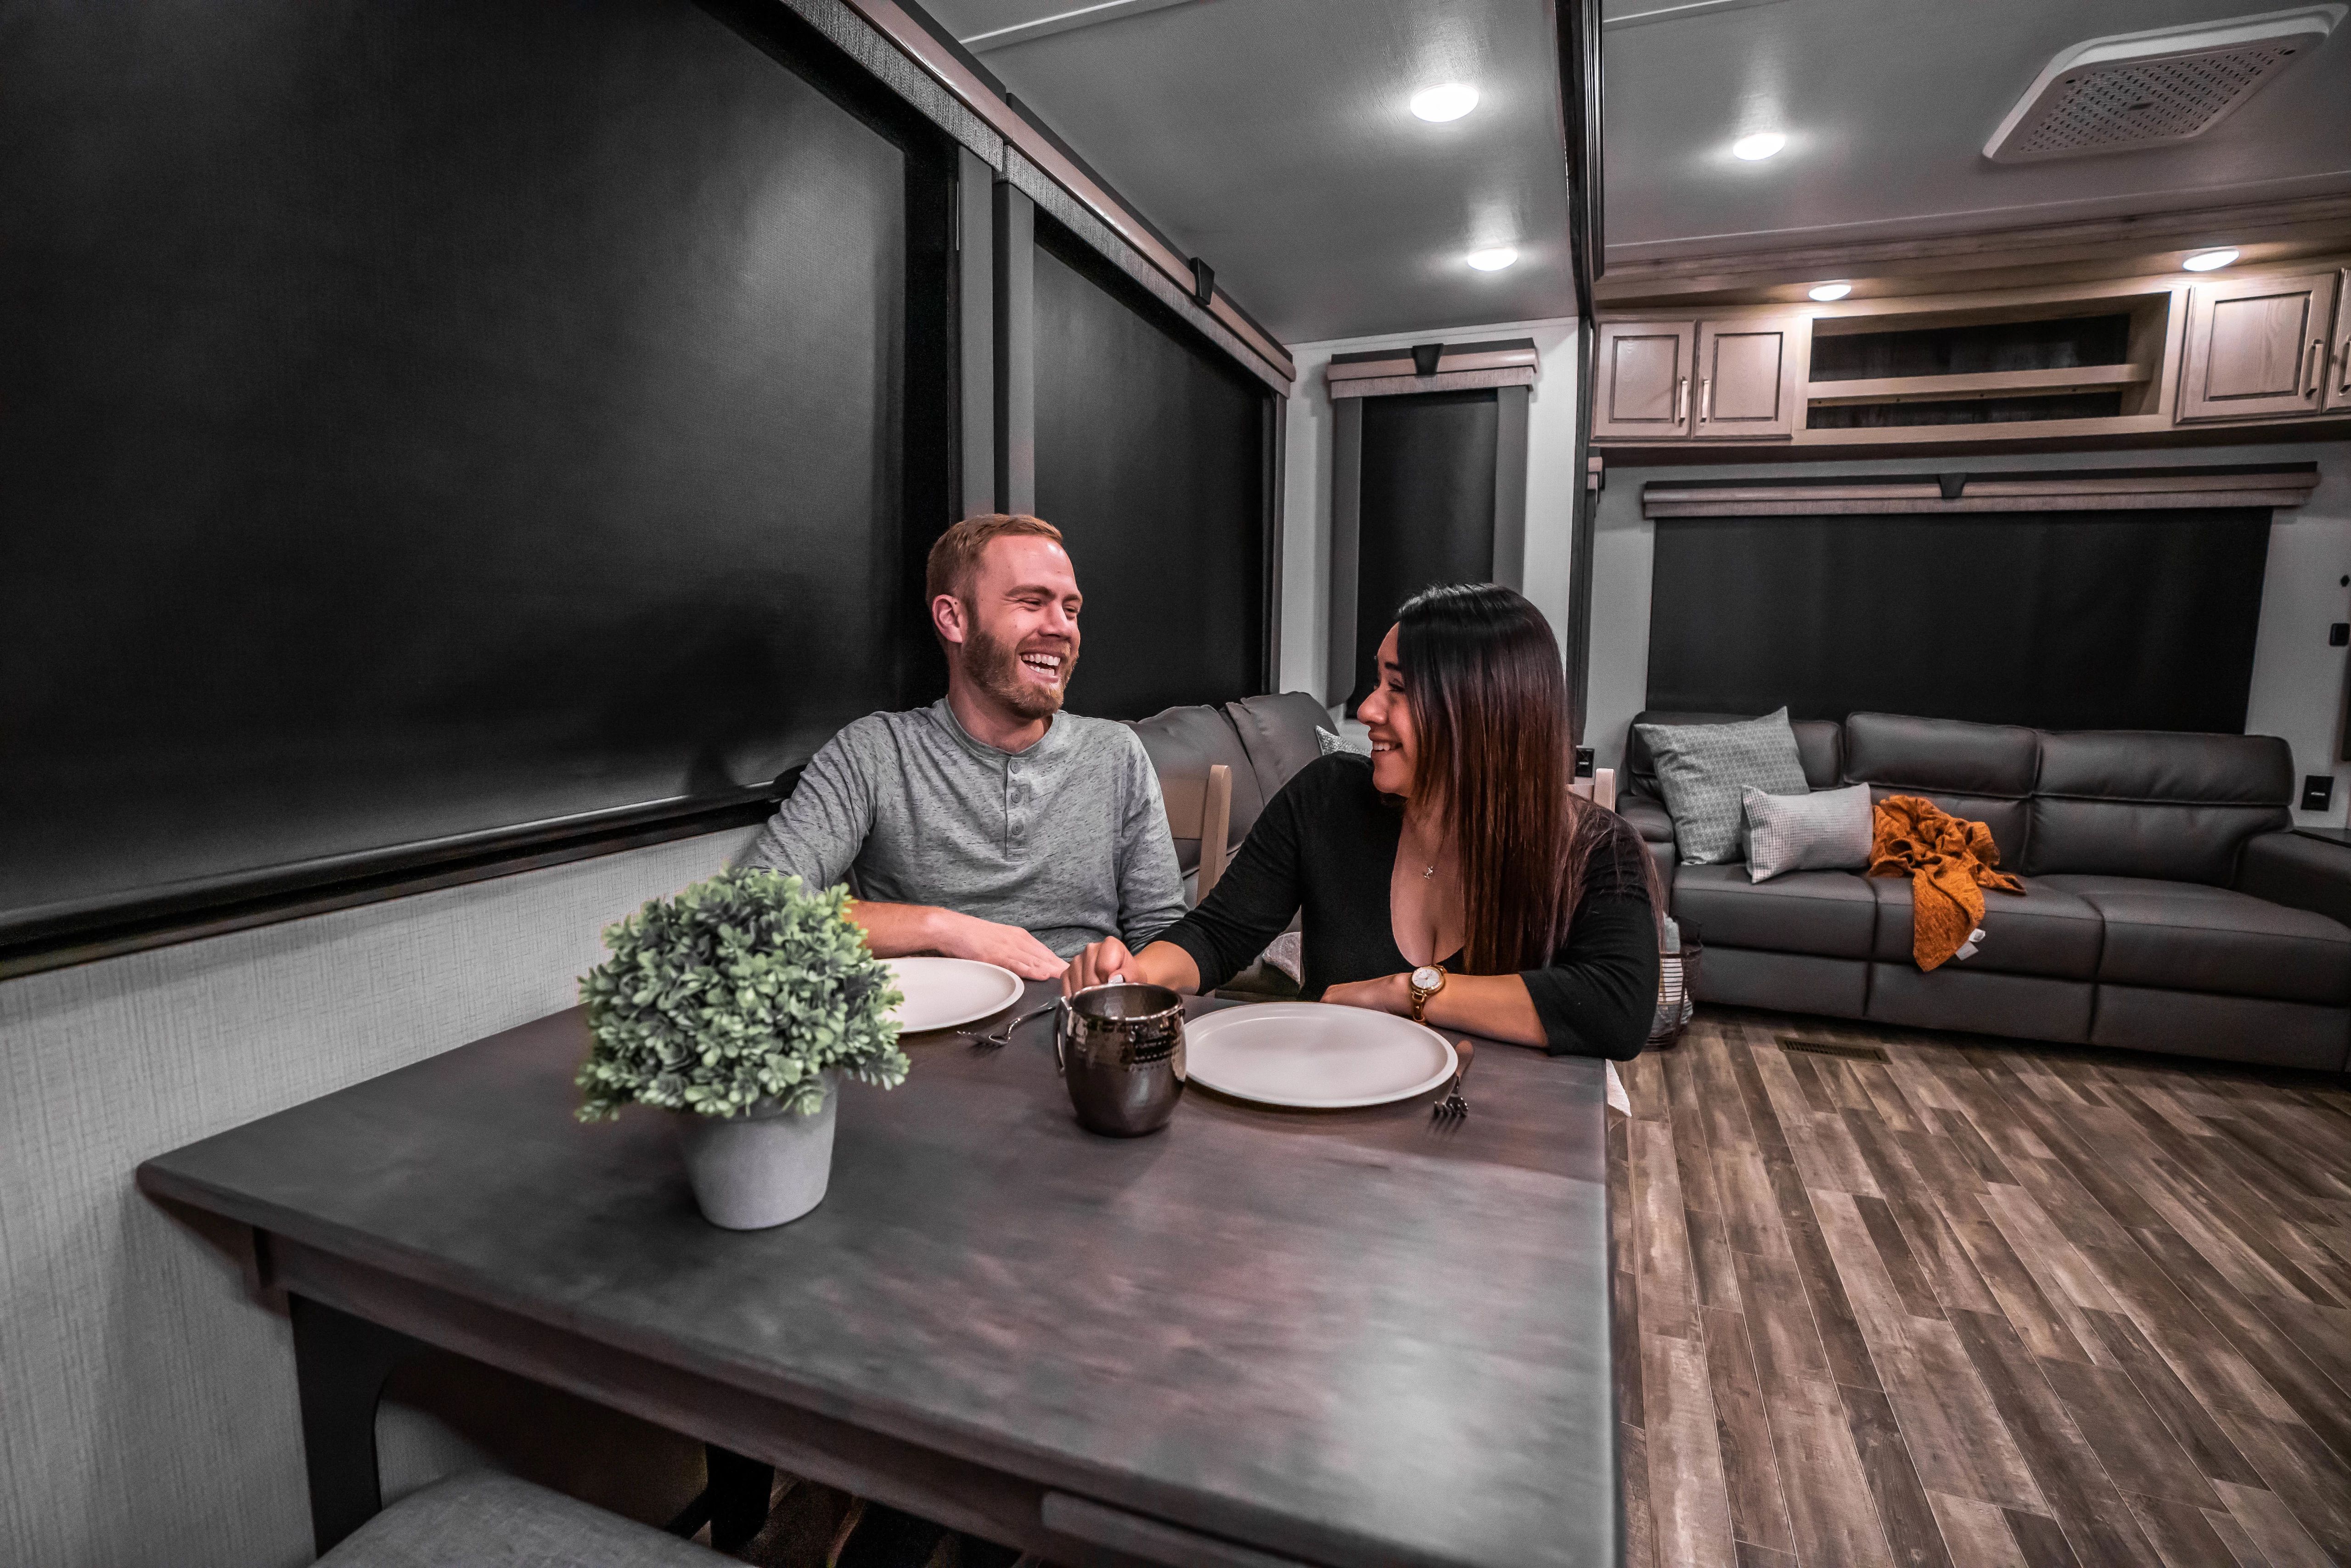 A young couple share a laugh seated at a dining room table in an RV.